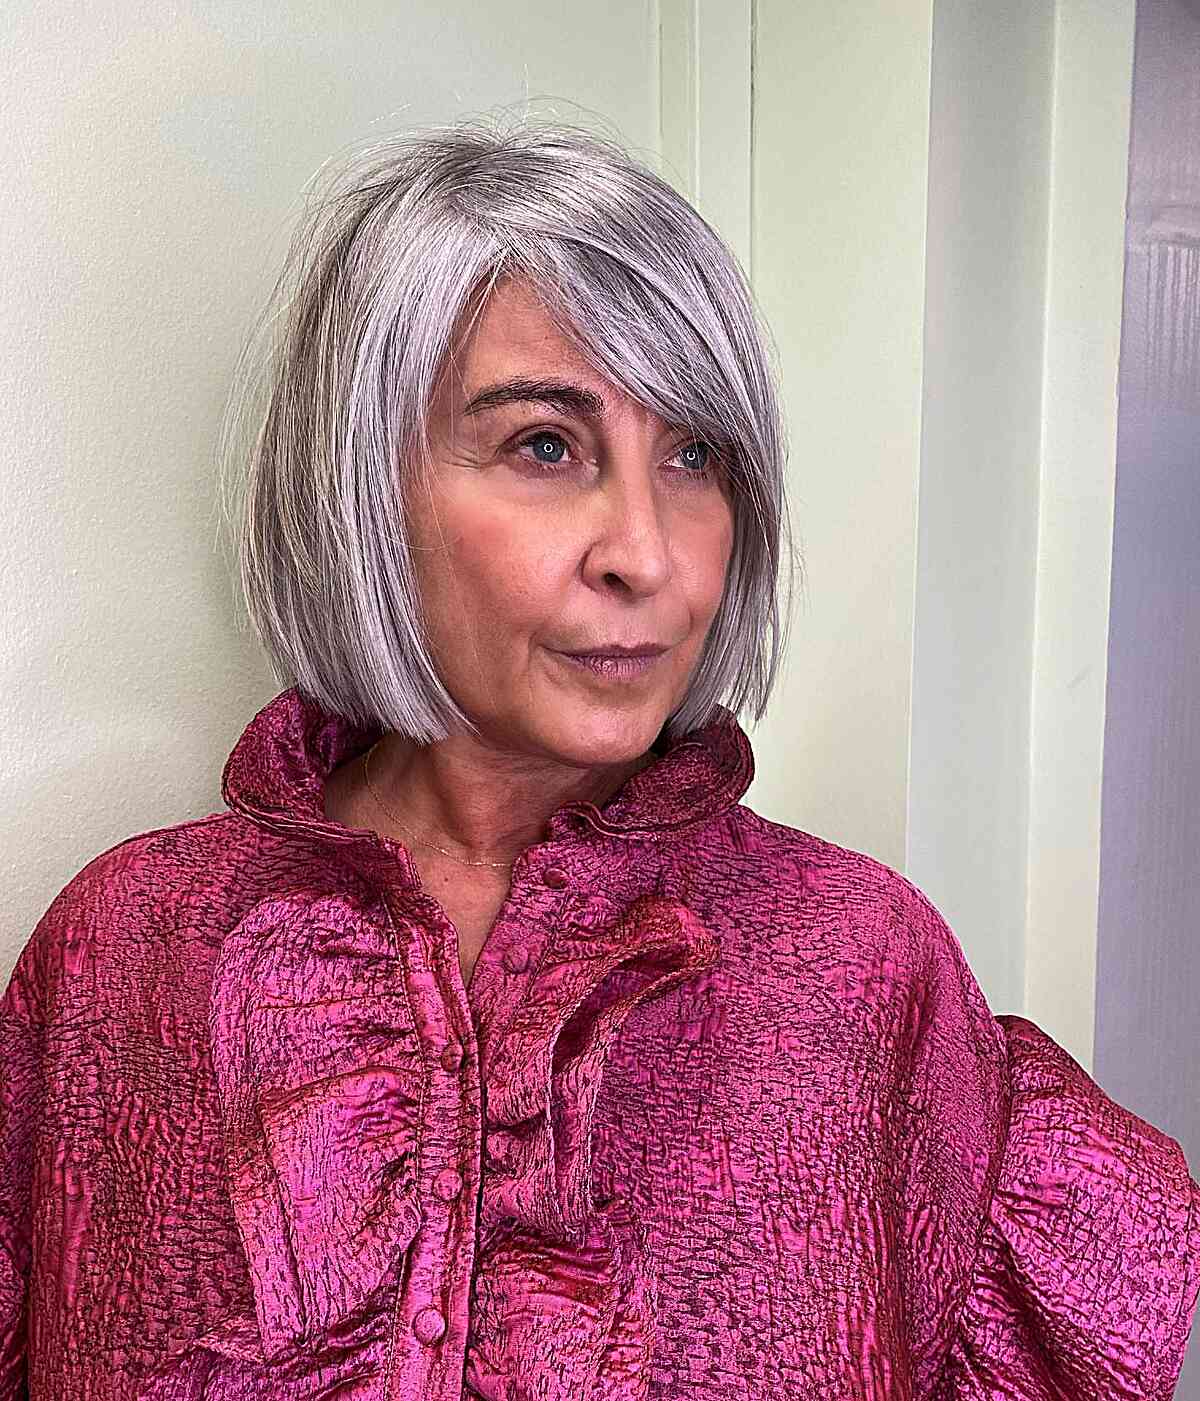 Grey Chin-Length Bob with Side-Swept Bangs on a Woman in Her 50s